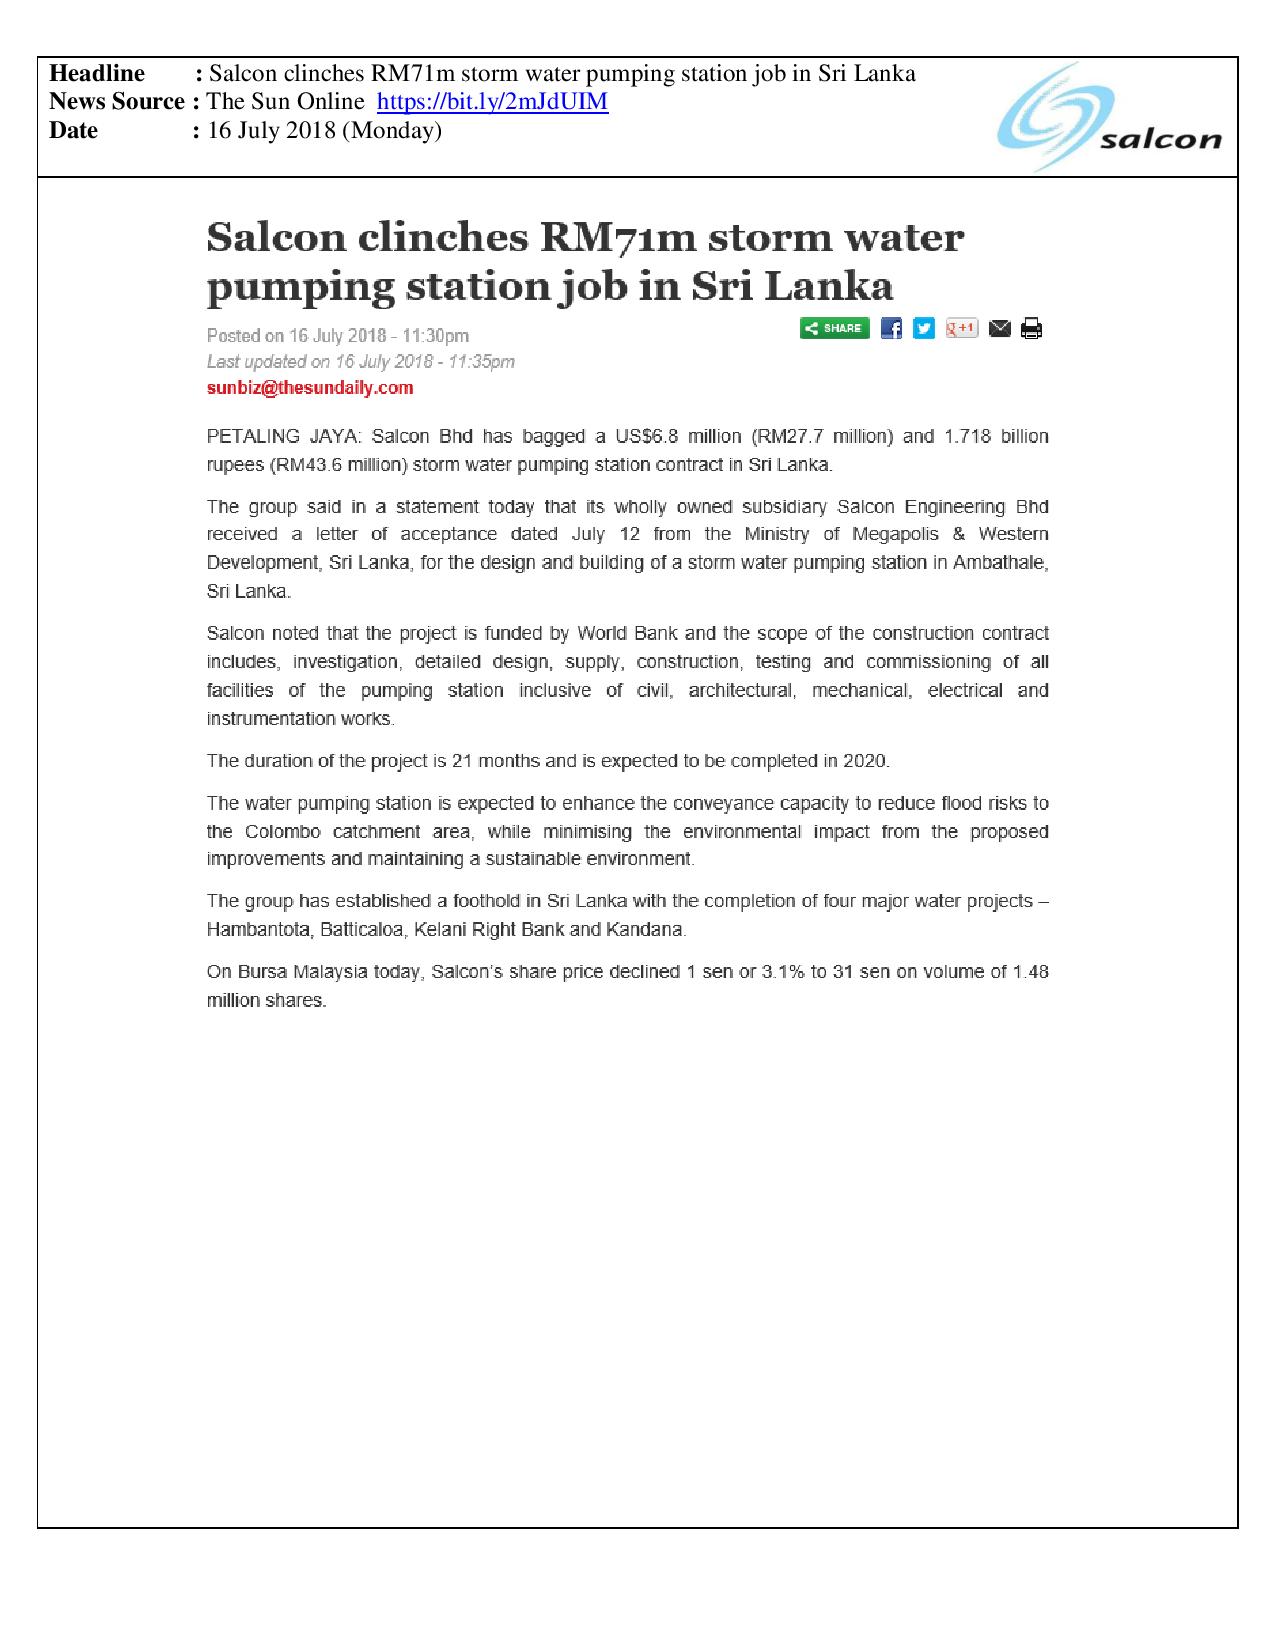 Salcon clinches RM71m storm water pumping station job in Sri Lanka